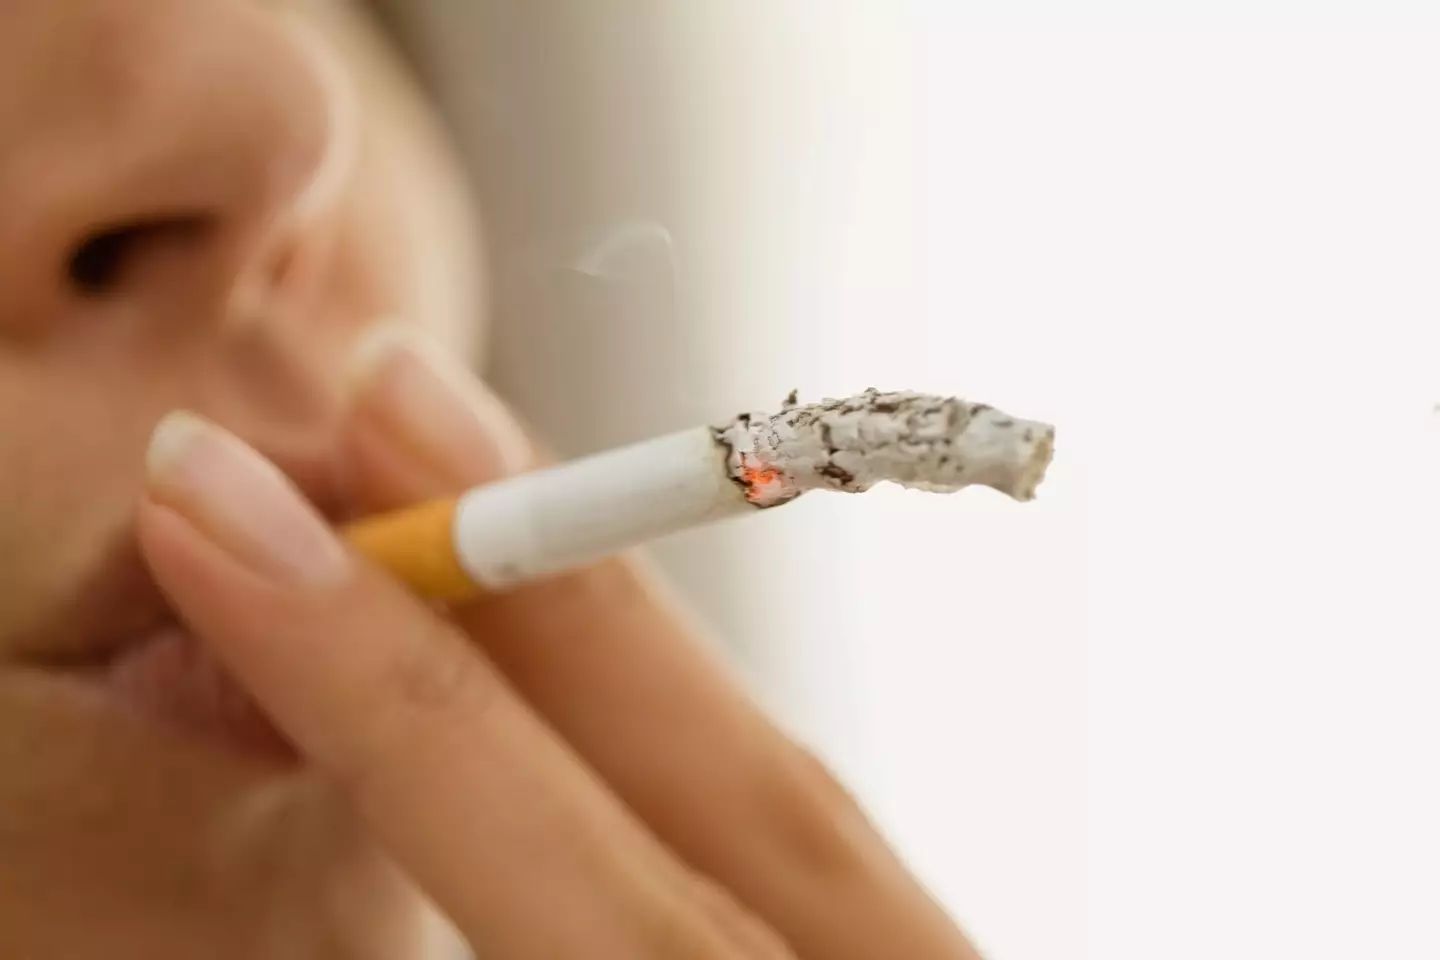 This news could be enough to make some stop smoking.